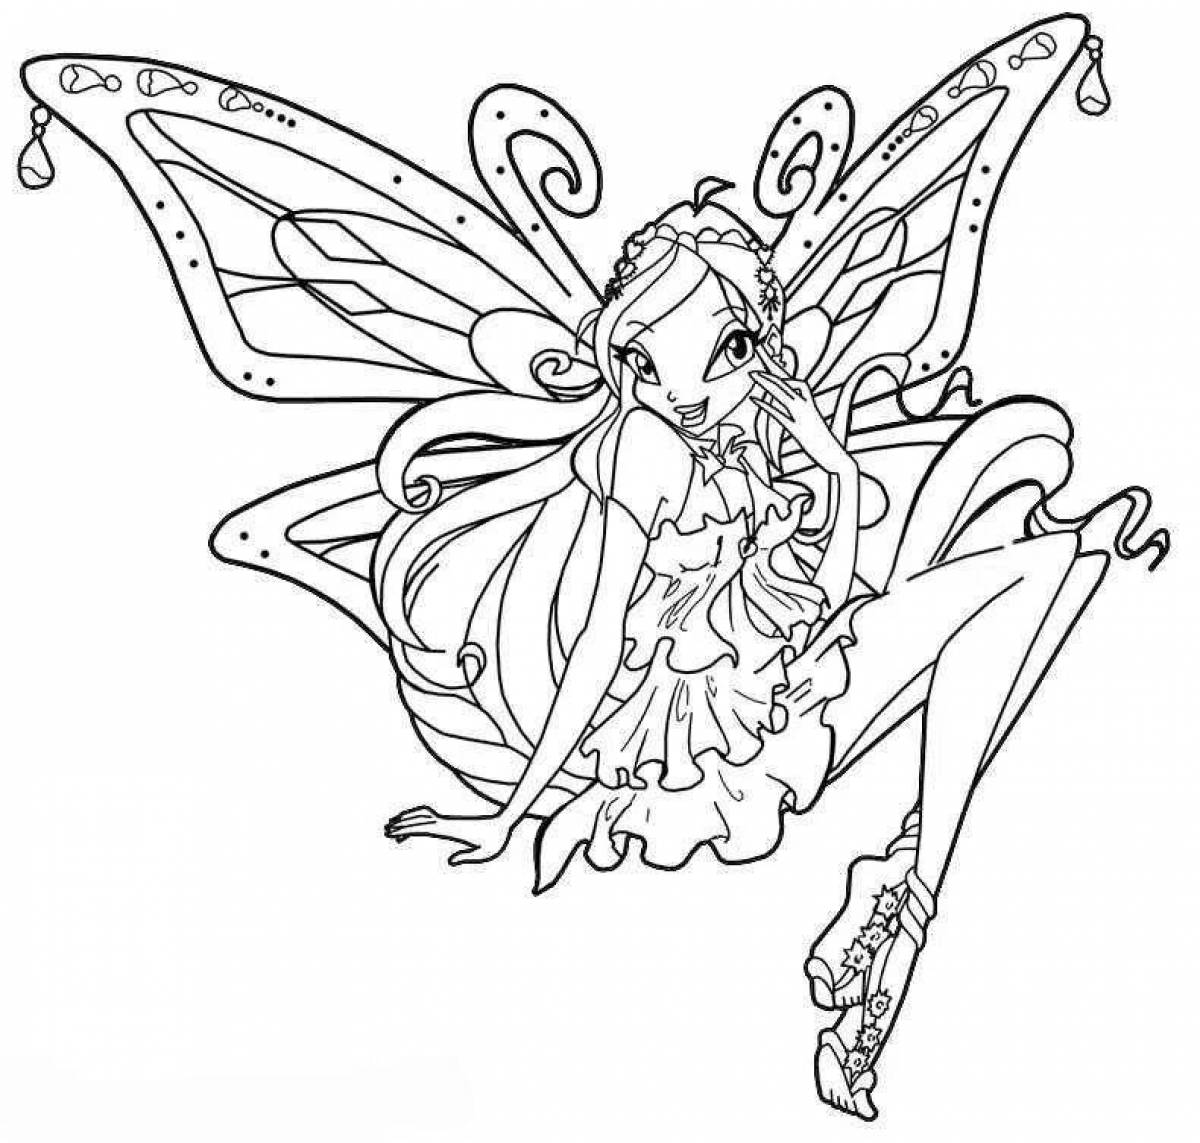 Exquisite winx coloring book for kids